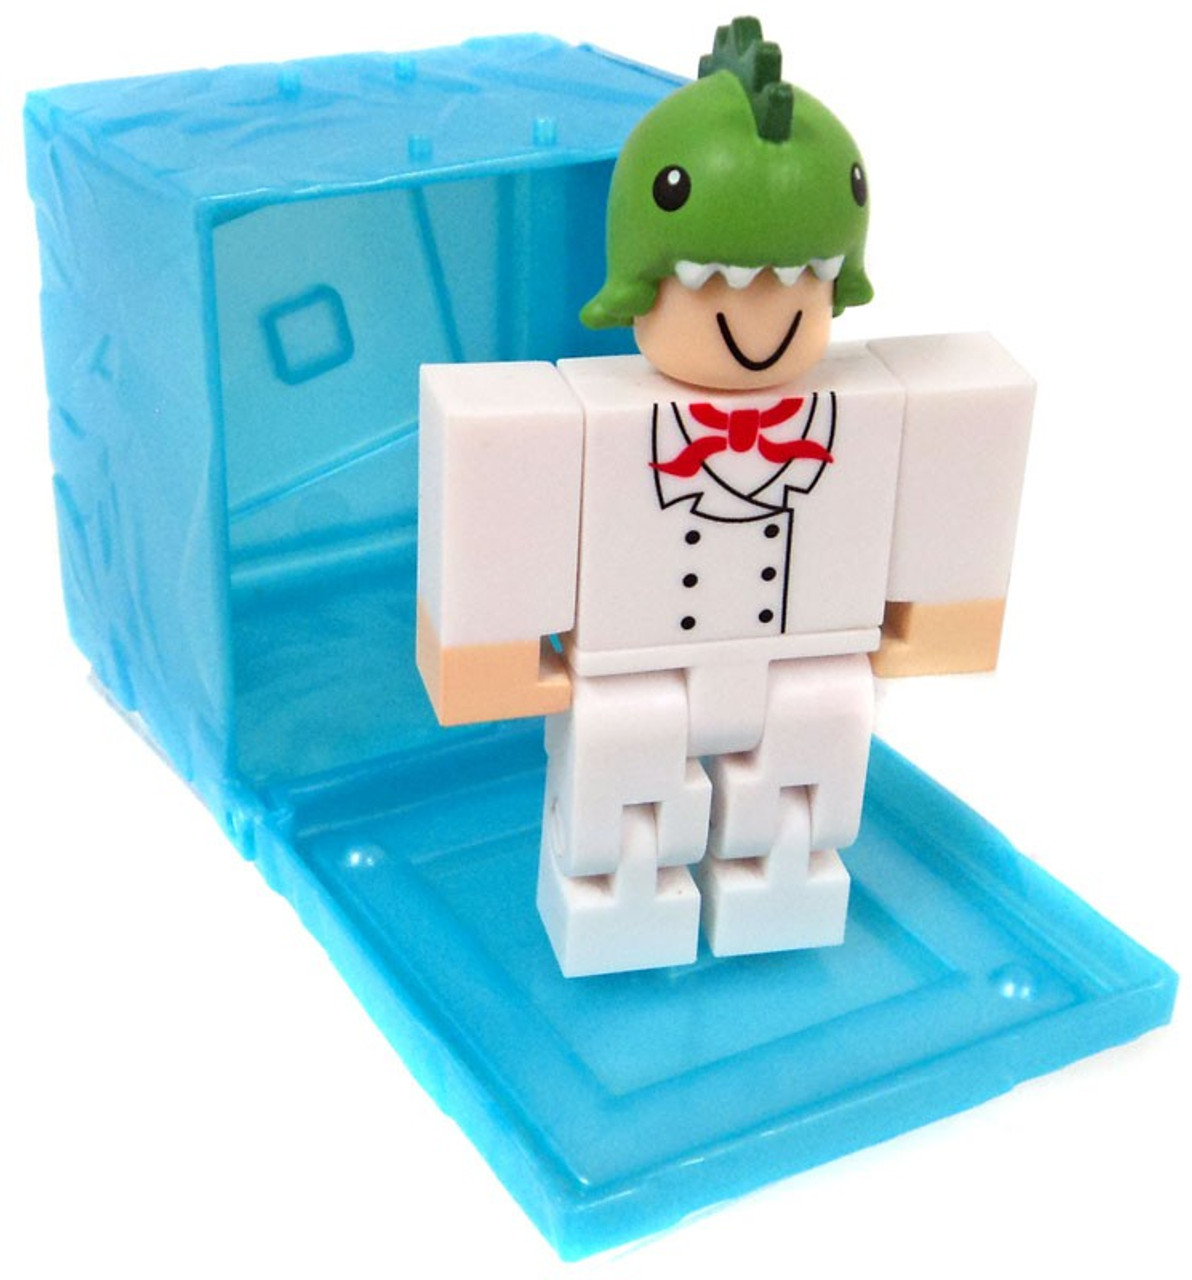 Roblox Red Series 3 Theme Park Tycoon Dino Vender 3 Mini Figure Blue Cube With Online Code Loose Jazwares Toywiz - roblox candy war tycoon 2 player codes